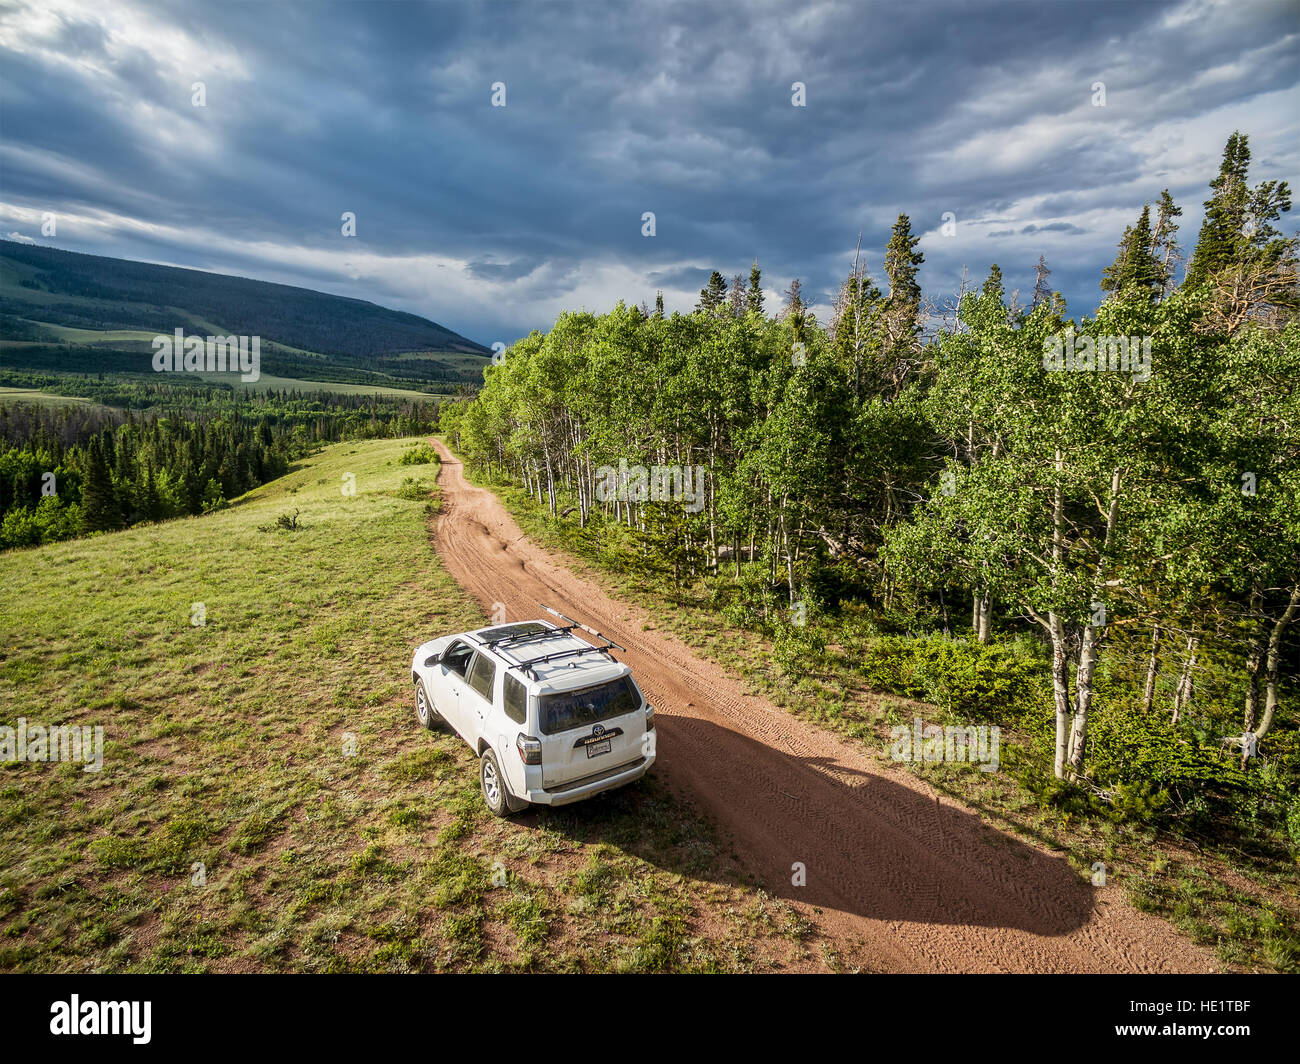 Toyota 4Runner SUV (2016 Trail edition) on a back country road in Colorado's Rocky Mountains - aerial view Stock Photo